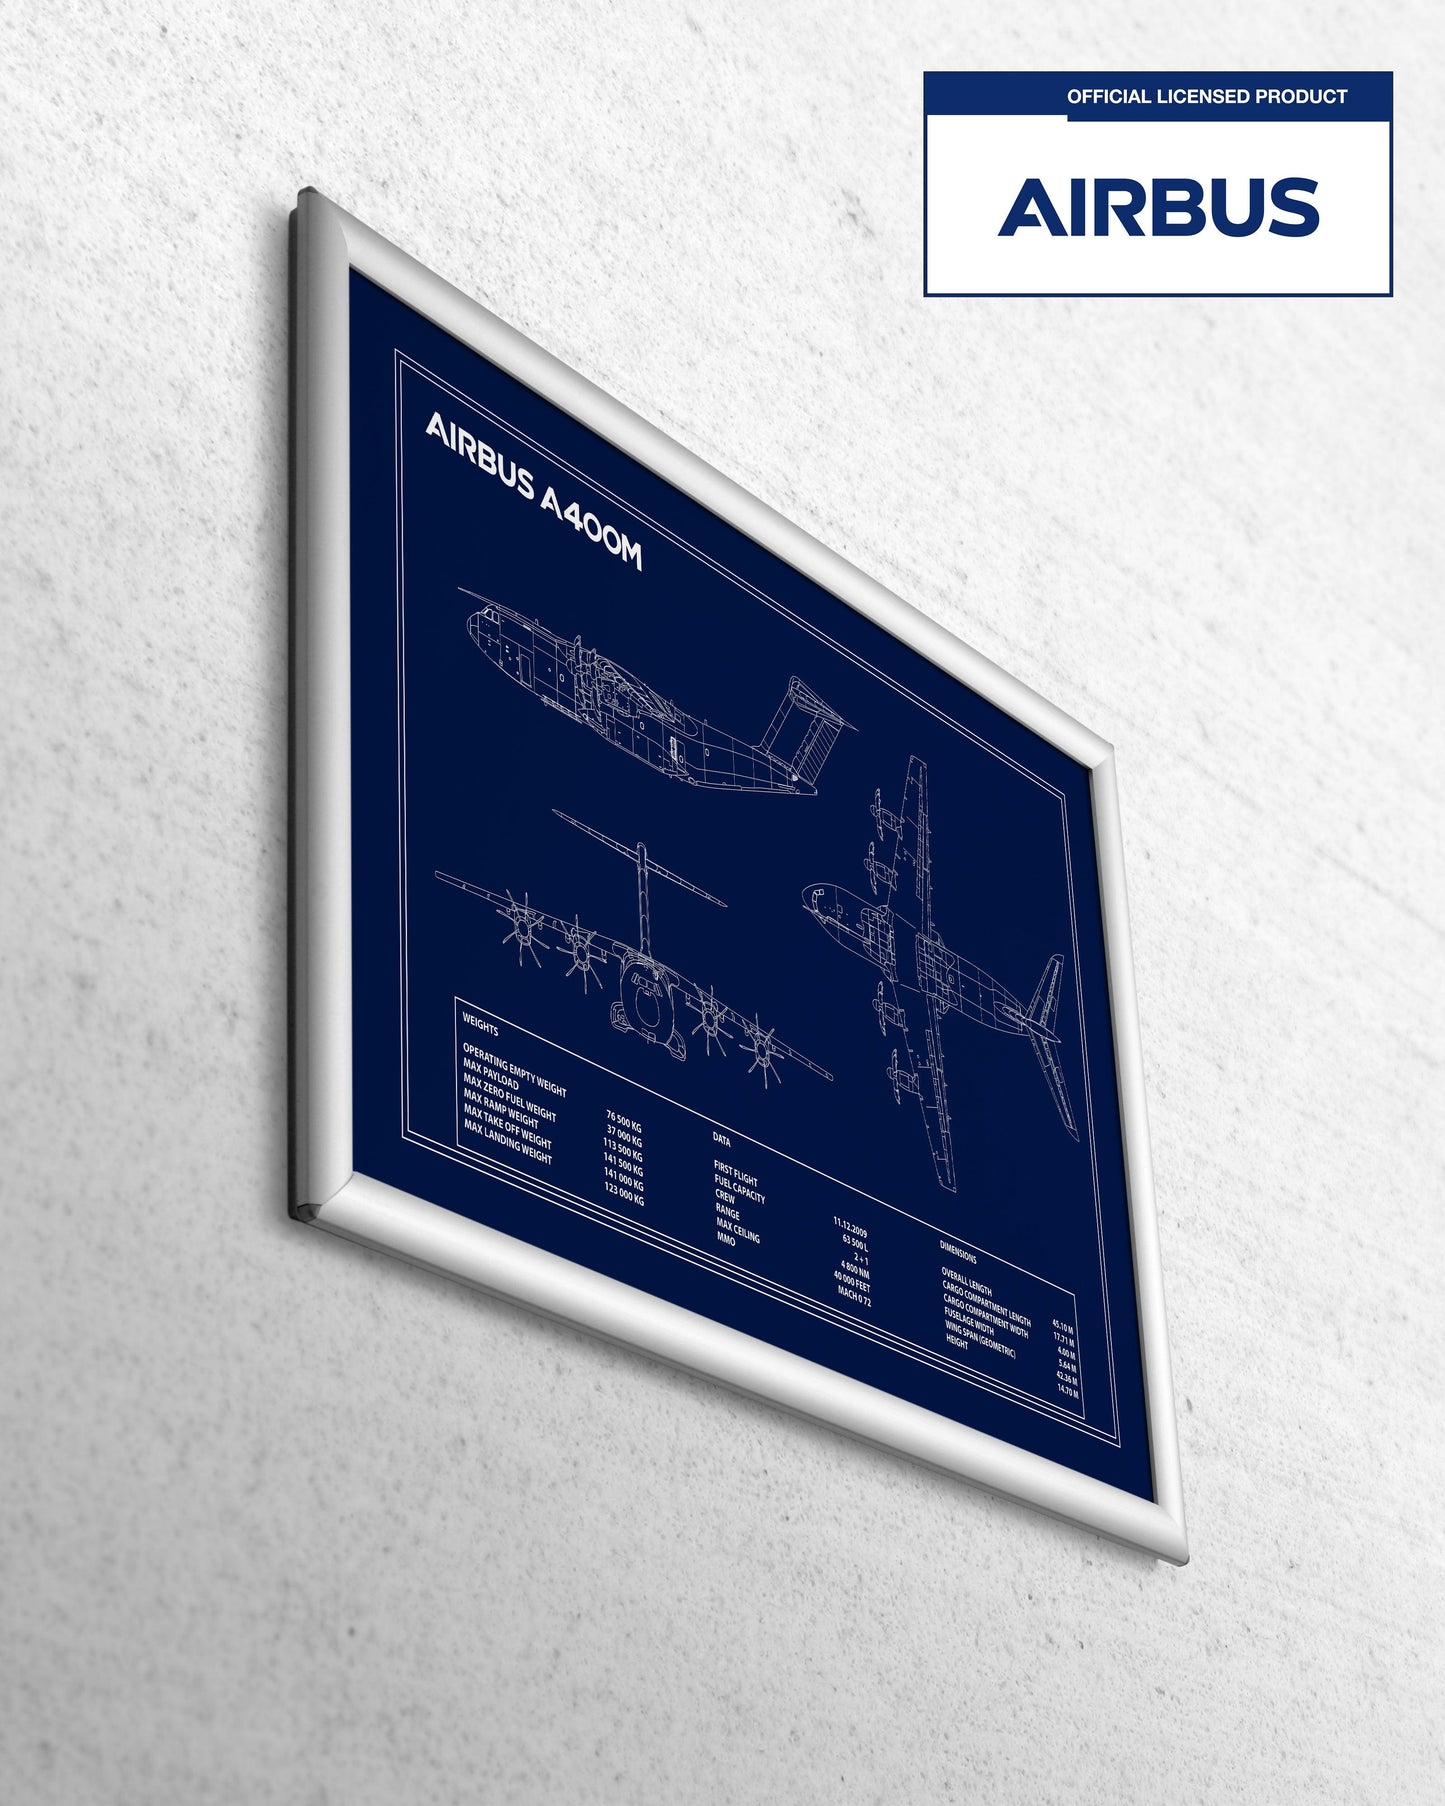 Airbus A400M Blueprint Poster